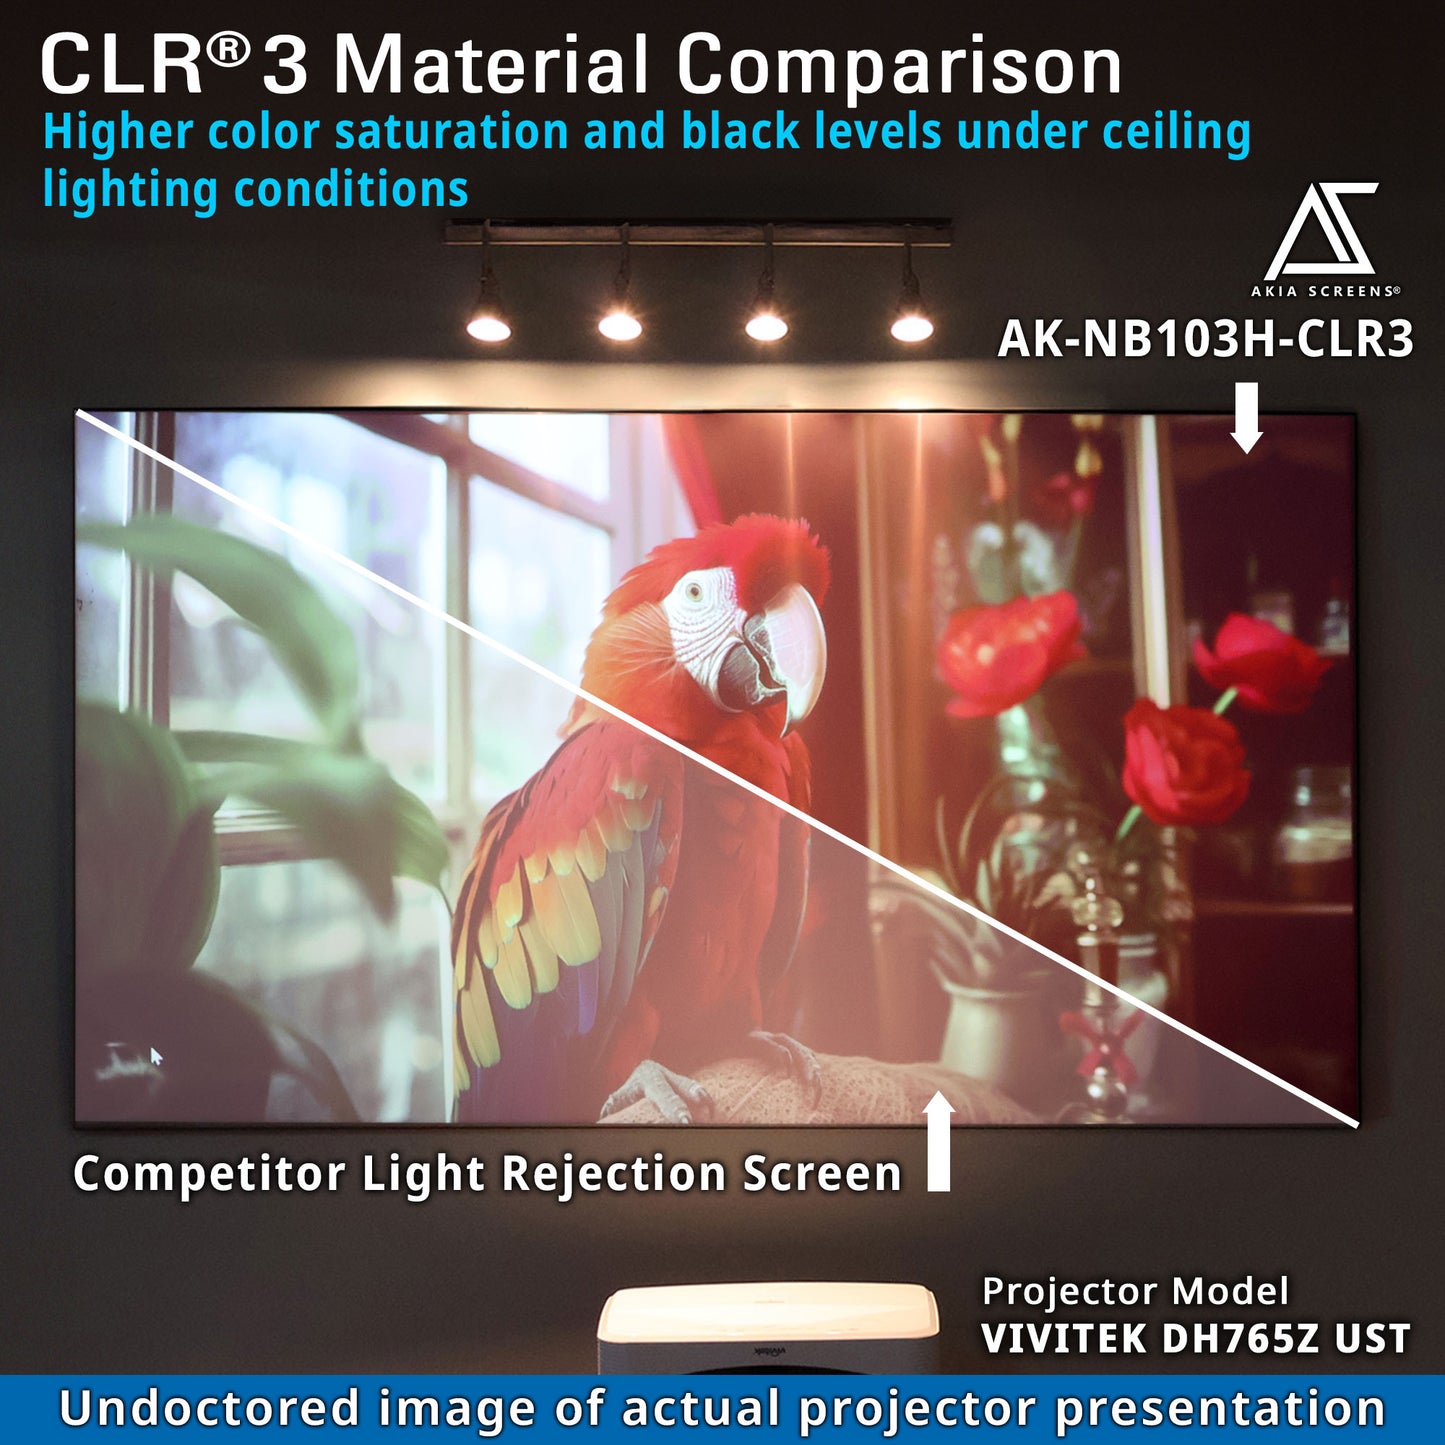 Edge Free® CLR3 Ambient Light Rejecting Screen